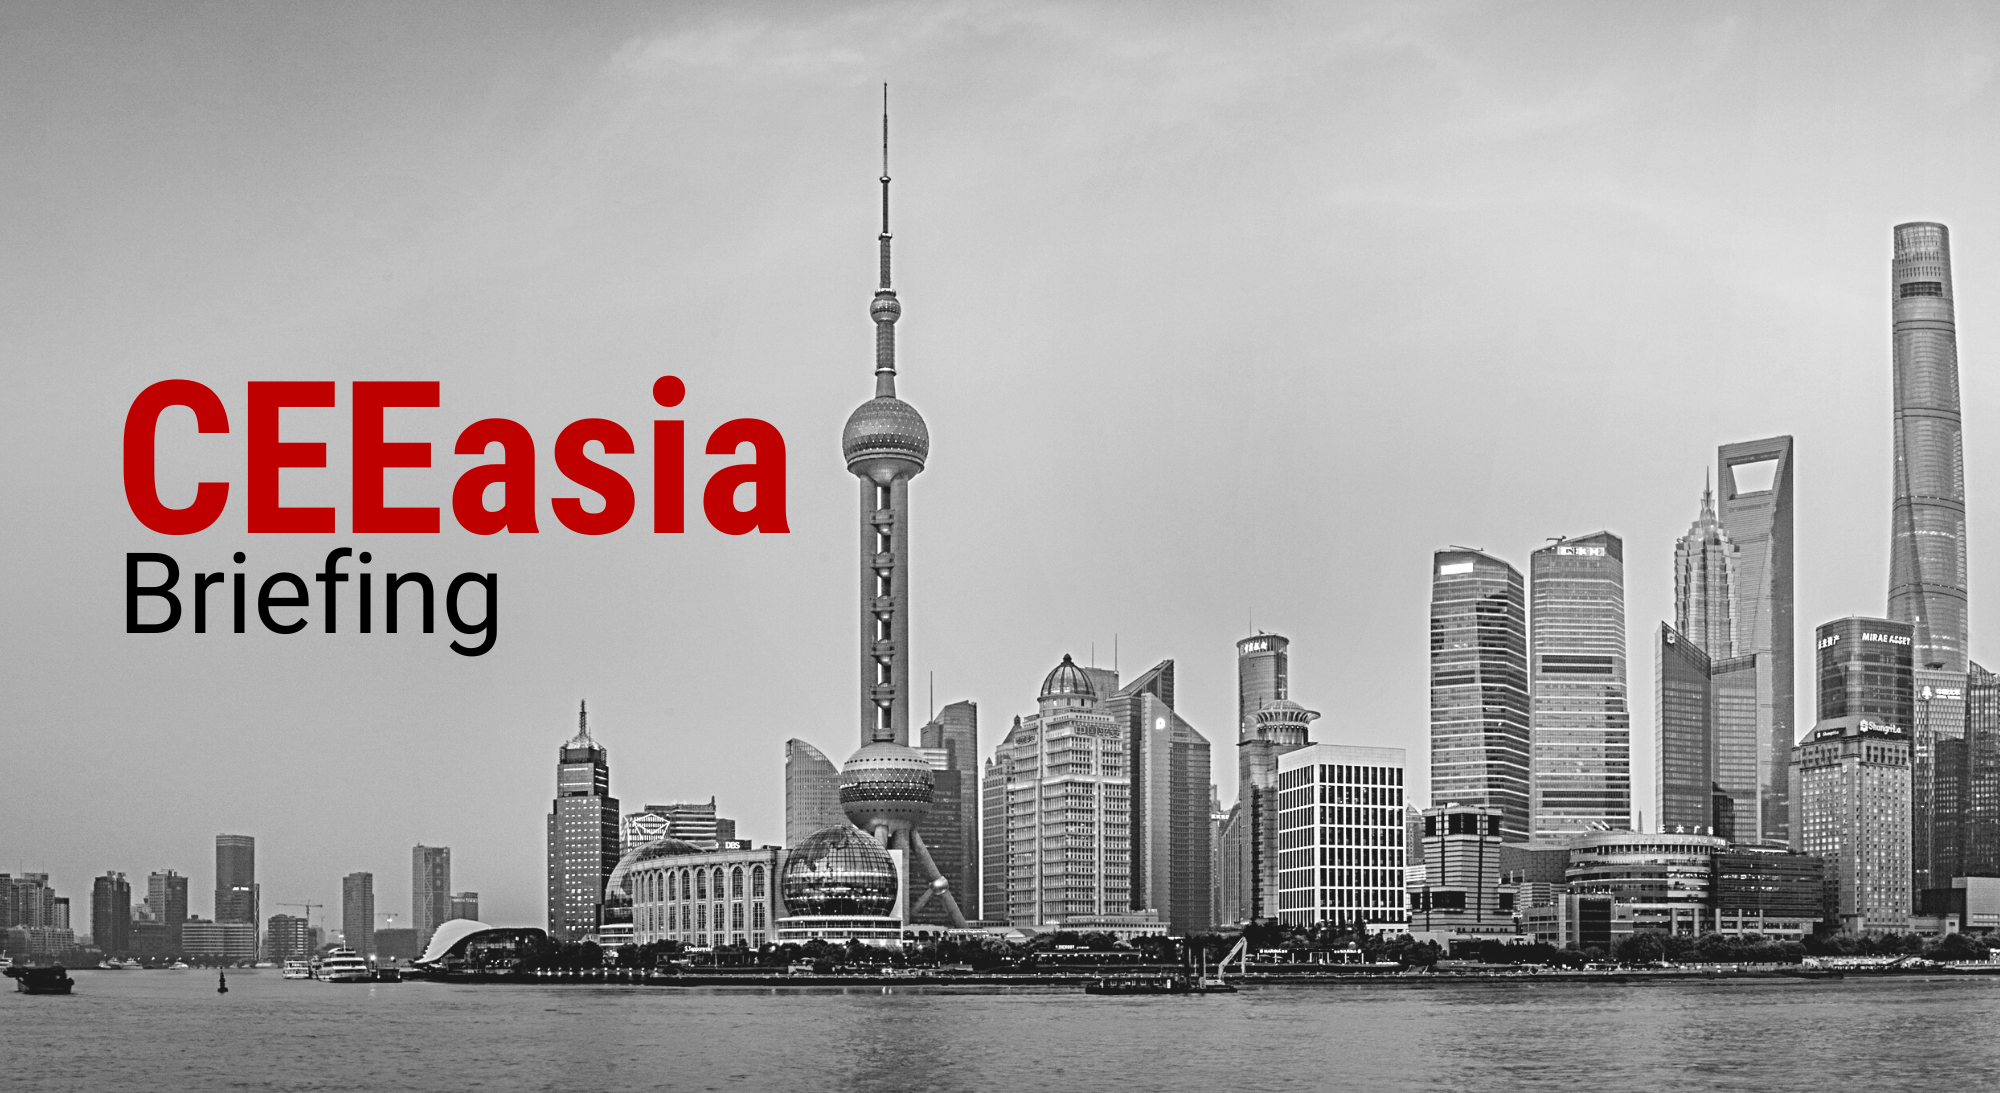 CEEasia Briefing #1: 17+1’s presidential treatment, V4’s view on China, EU & Japan partnership, territorial disputes and economic dependence within ASEAN